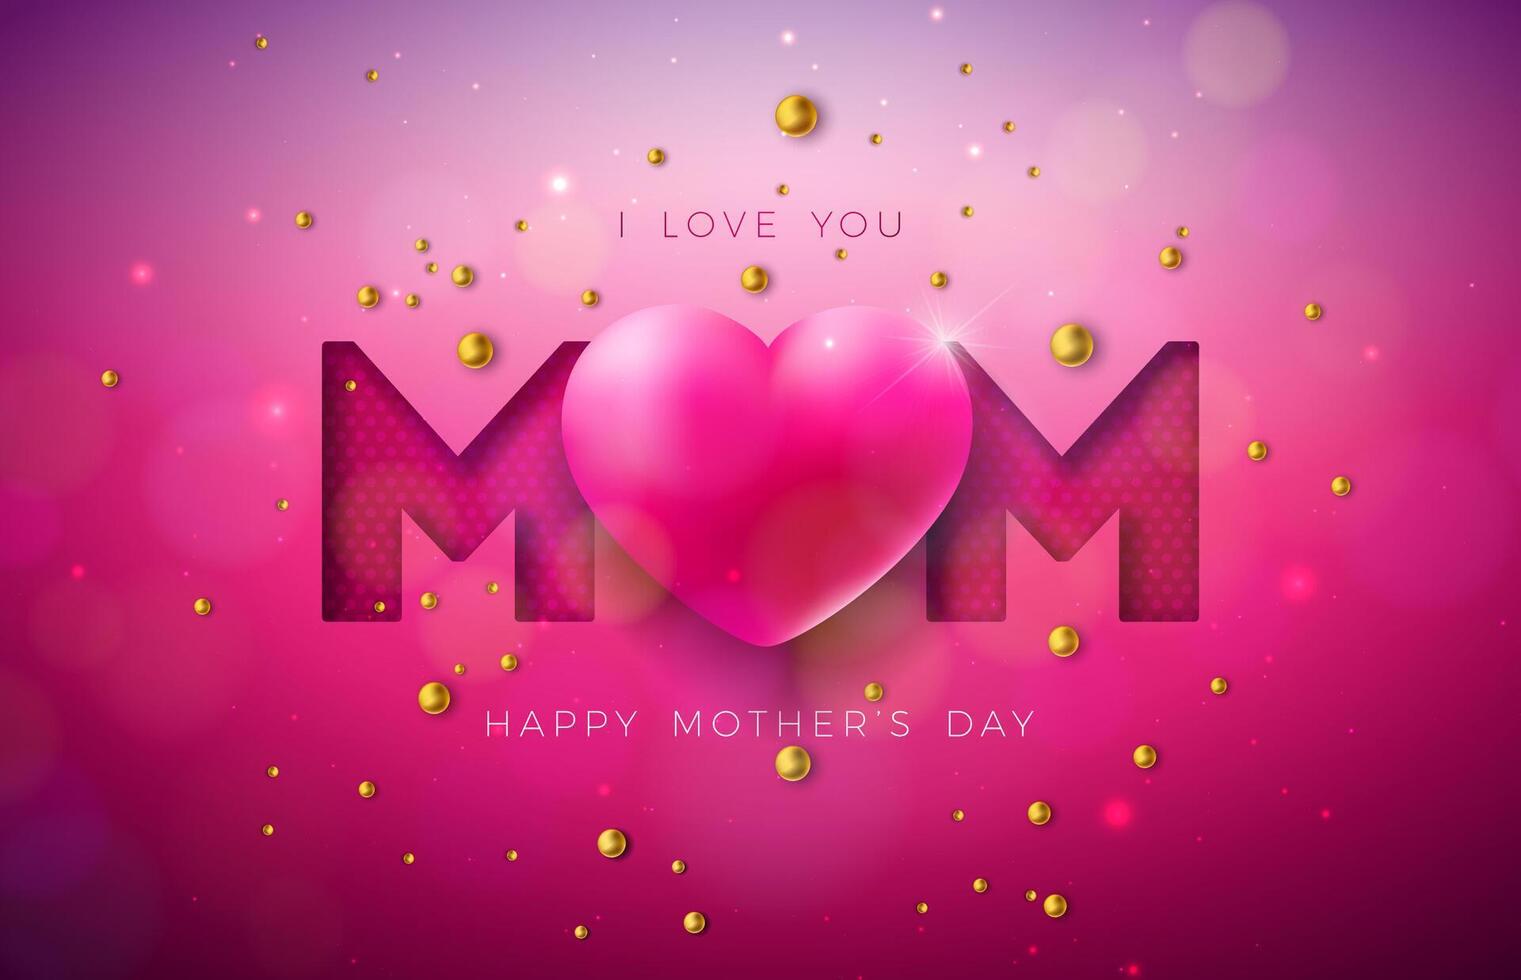 I Love You Mom. Happy Mother's Day Greeting Card Design with Heart and Pearl on Red Background. Vector Celebration Illustration Template for Banner, Flyer, Invitation, Brochure, Poster.